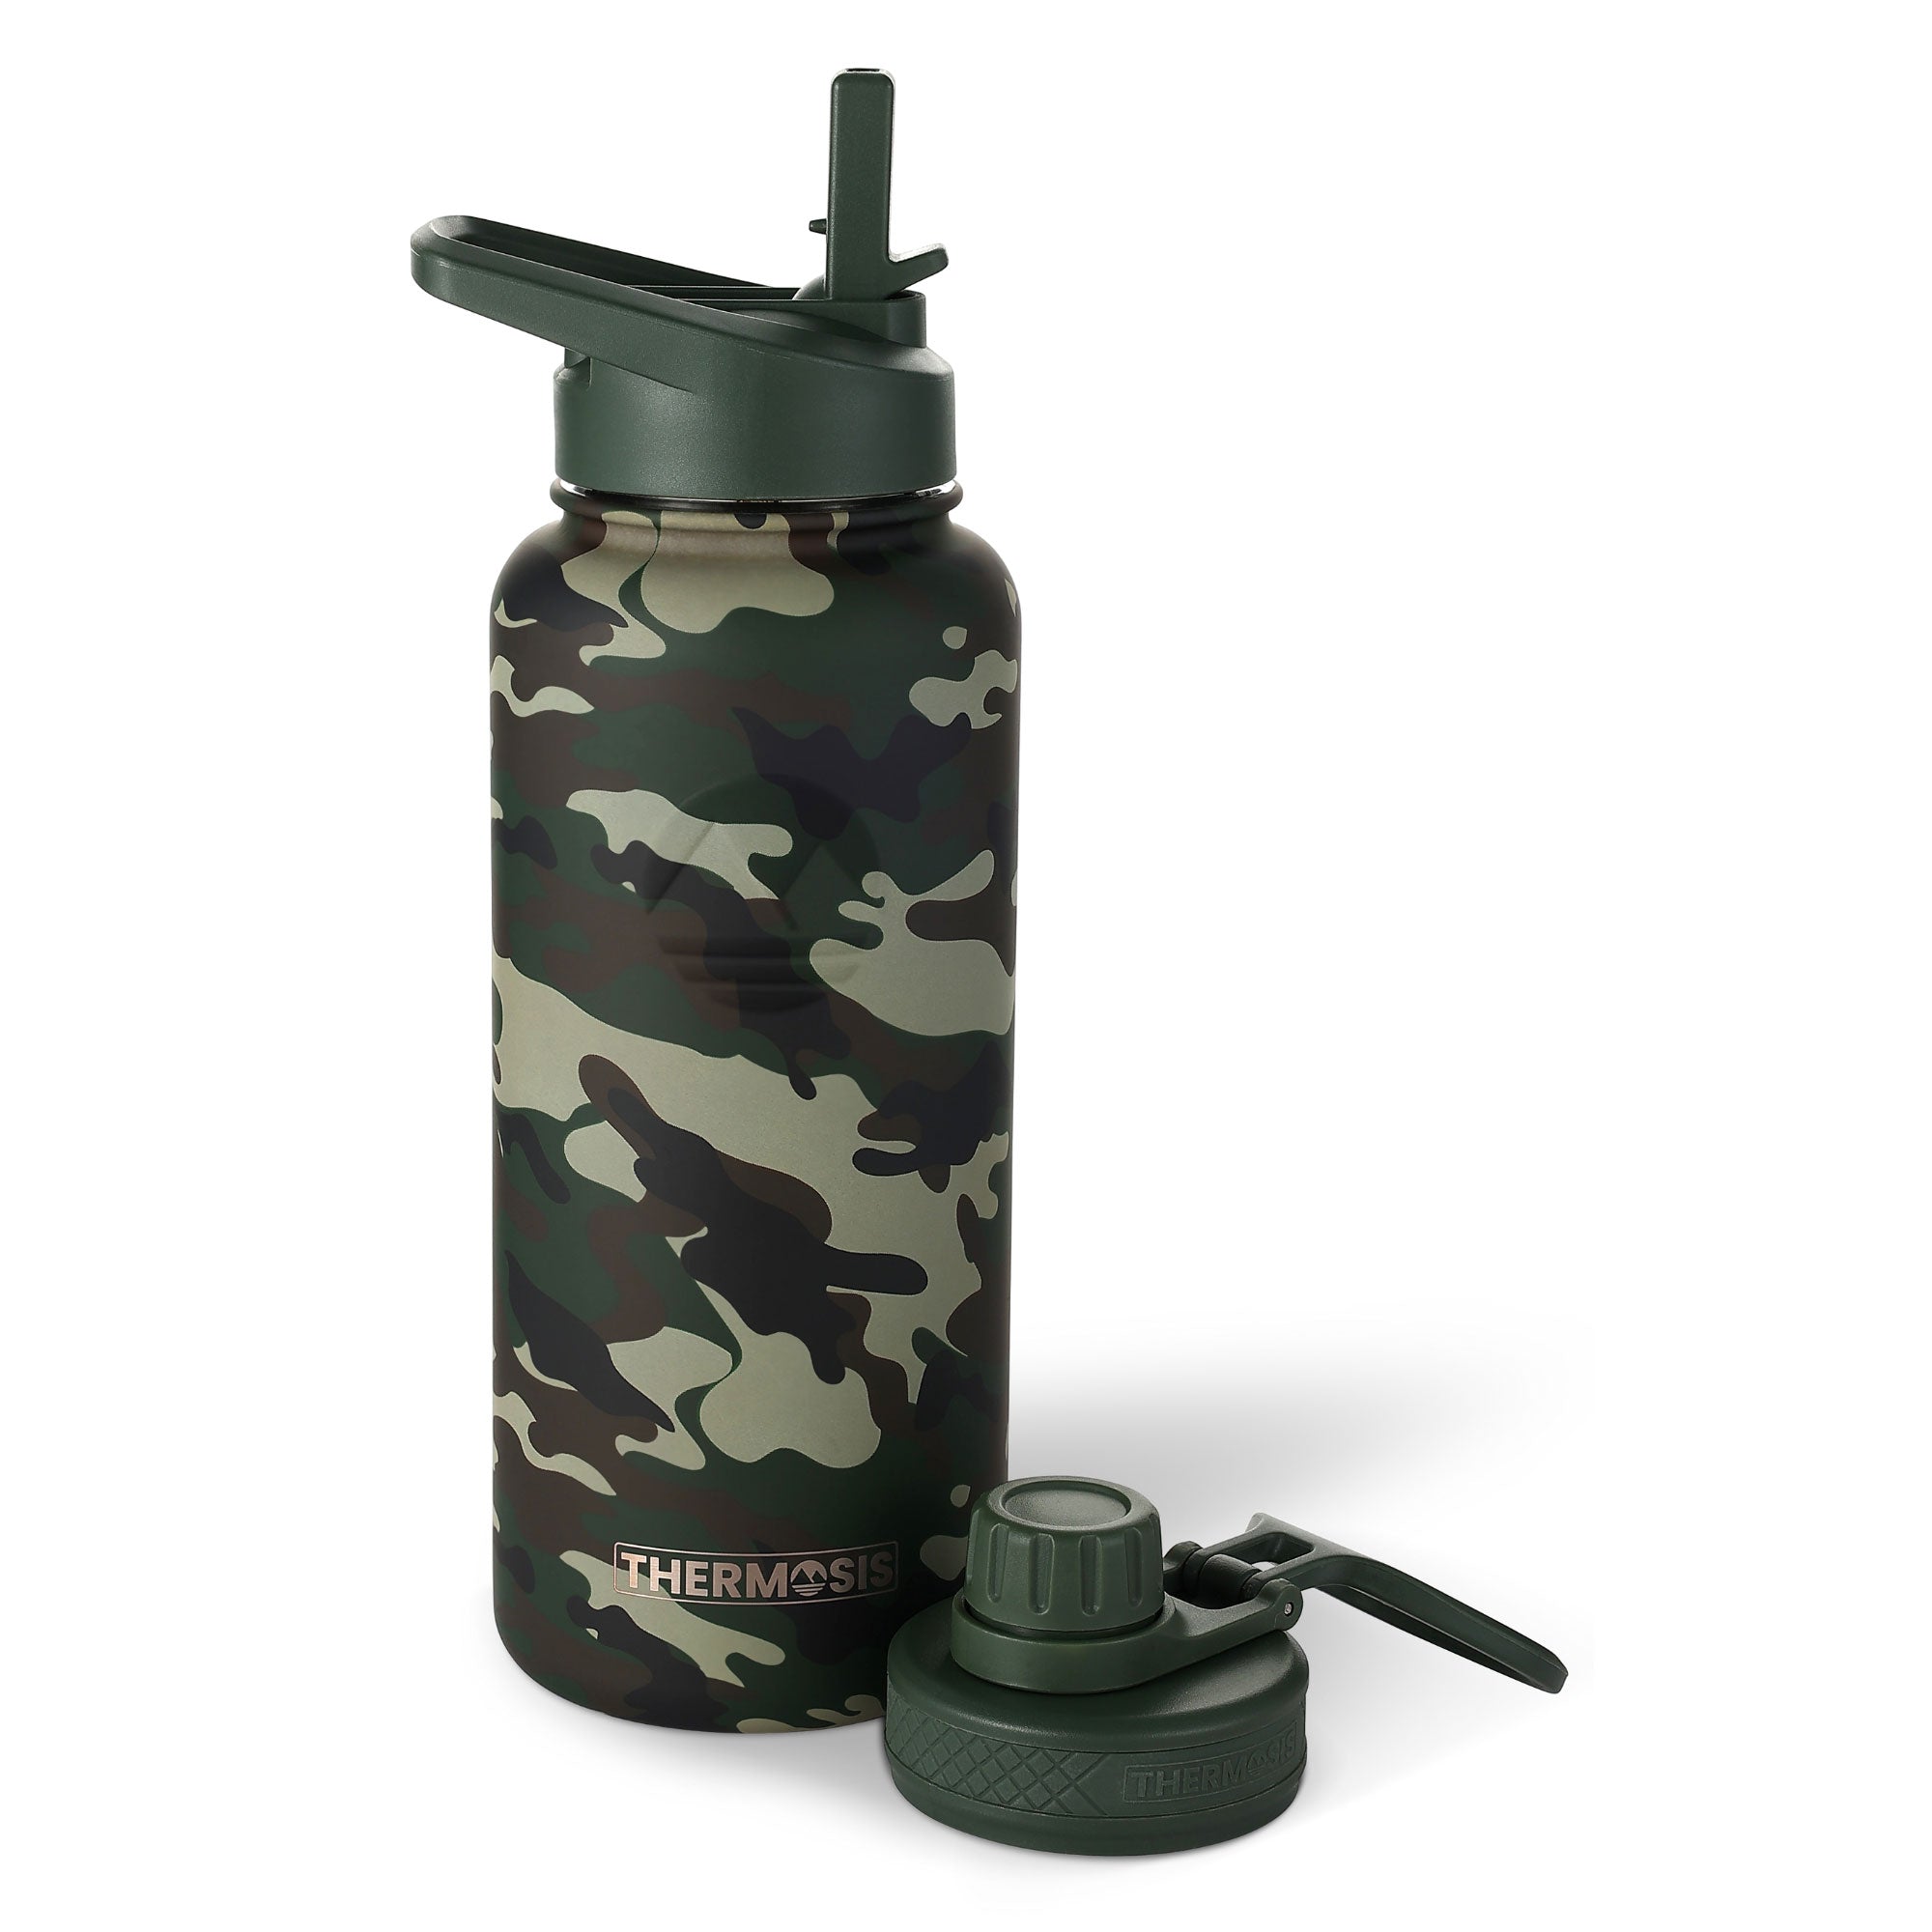  Military Camouflage Stainless Steel Coffee Thermos, Double  Walled Insulated Water Bottle for Outdoor Sports, Office, Car (17  OZ/500ML): Home & Kitchen